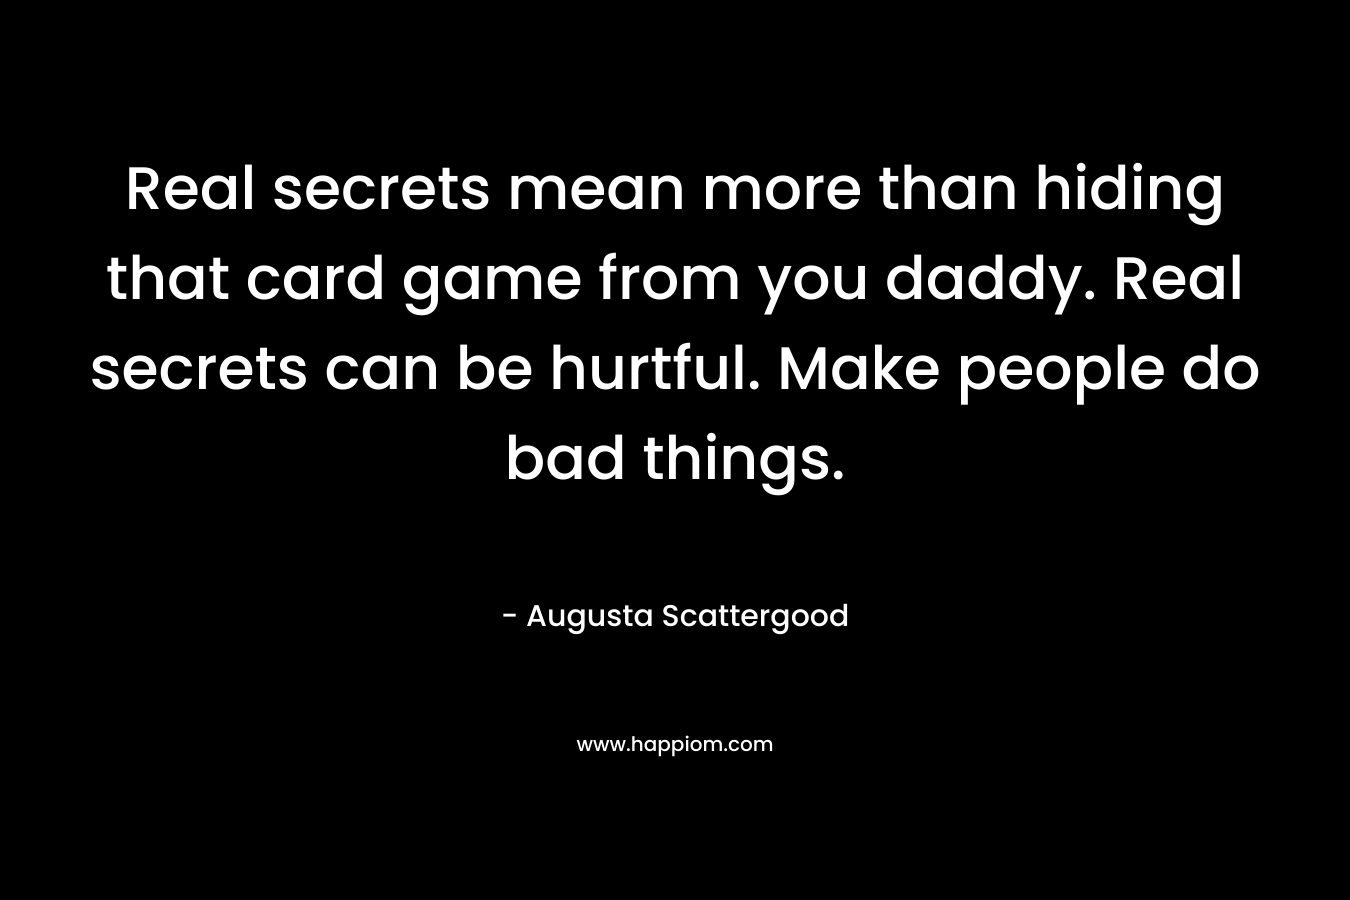 Real secrets mean more than hiding that card game from you daddy. Real secrets can be hurtful. Make people do bad things. – Augusta Scattergood